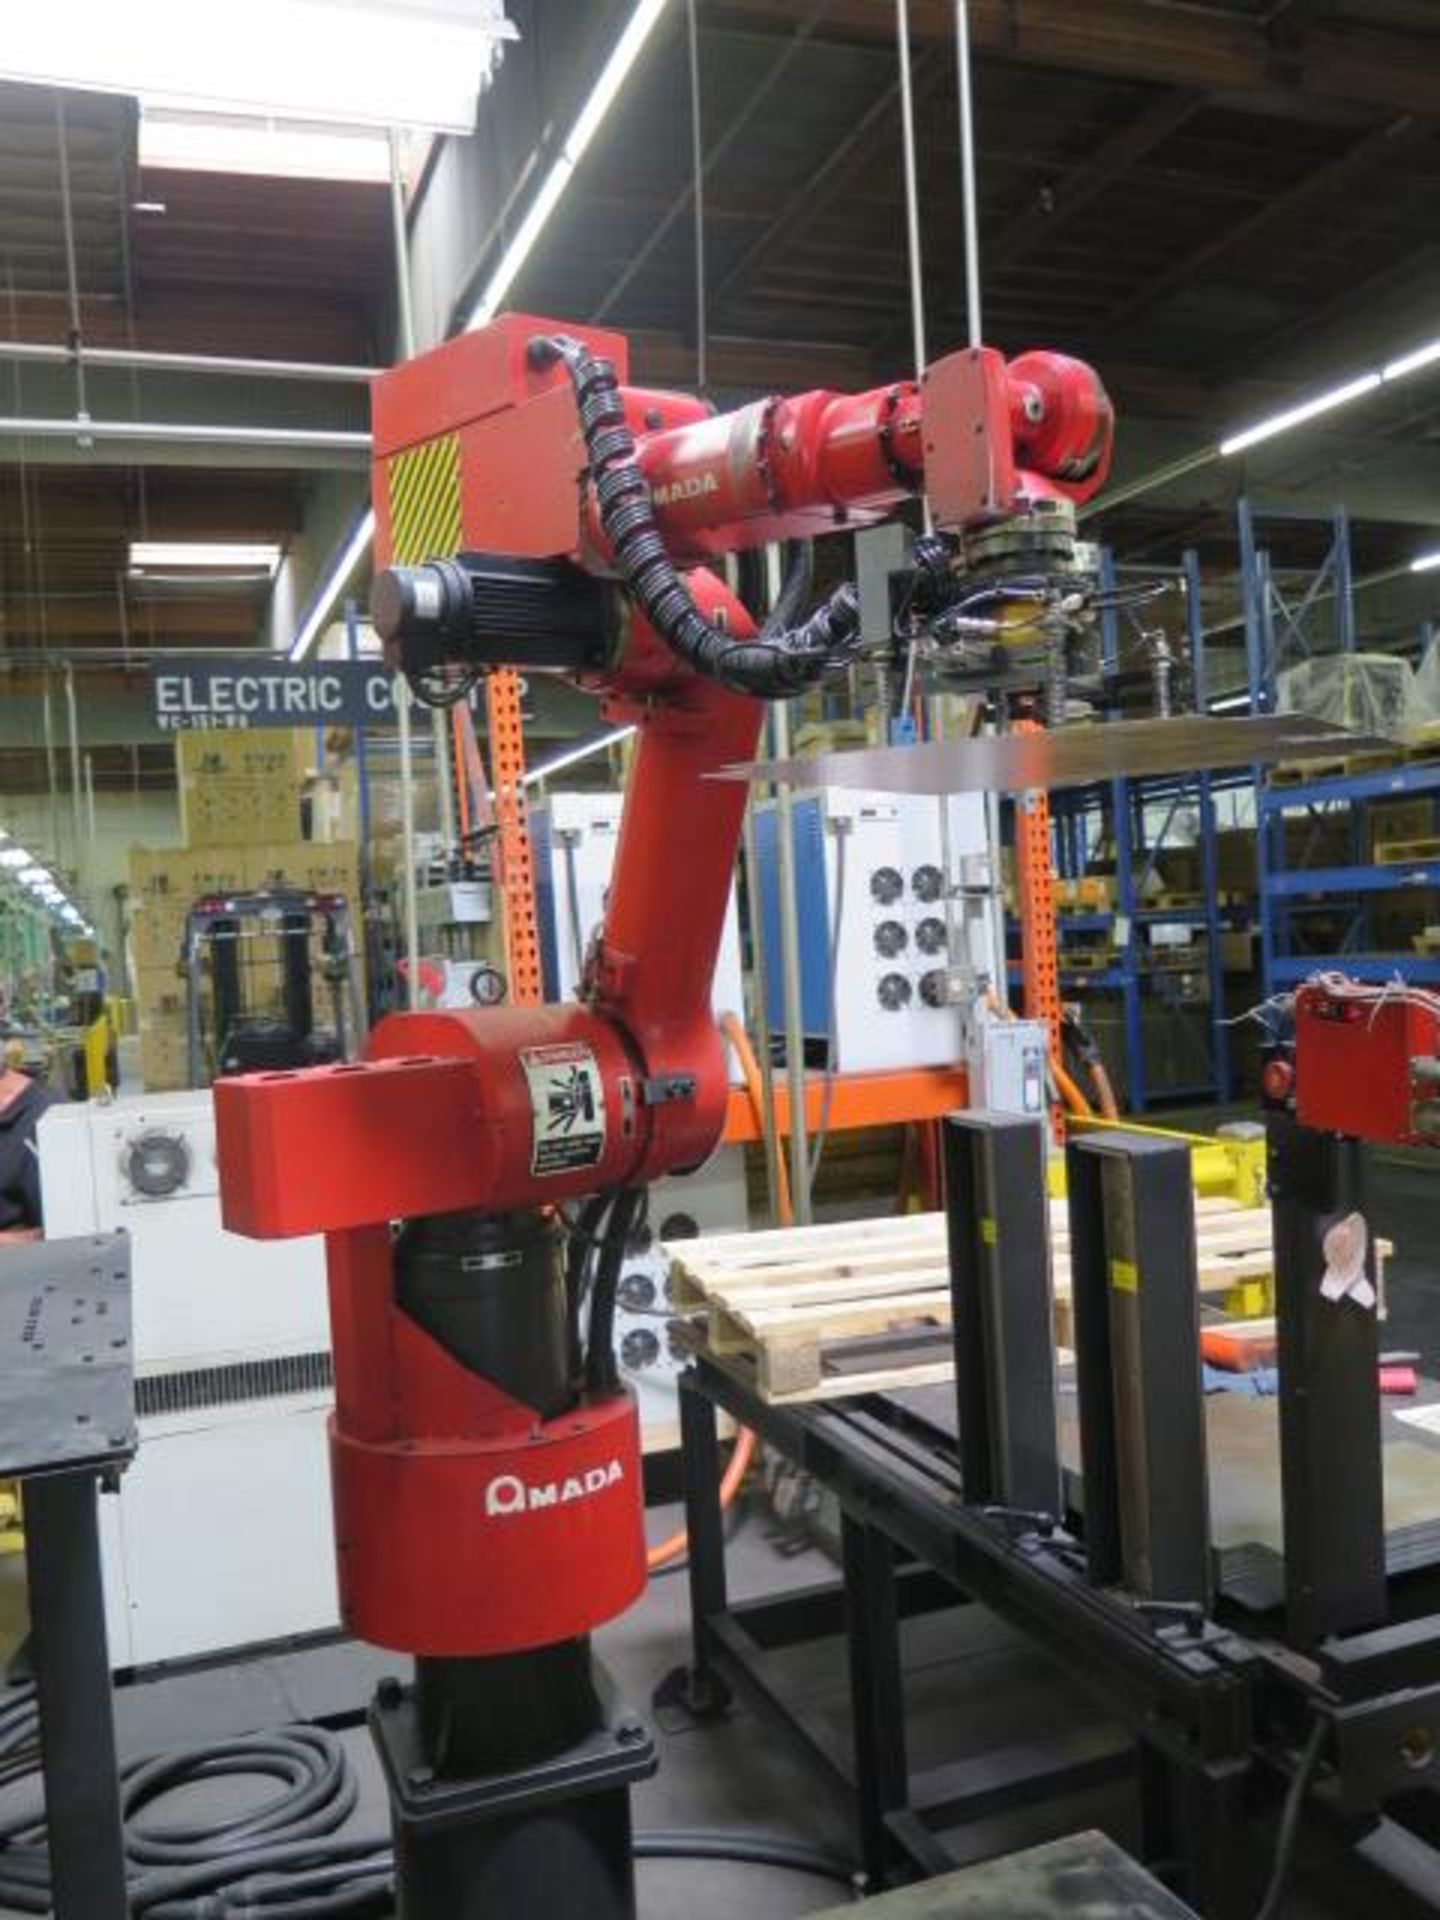 2000 Amada ASTRO-100 mdl.FcxB III-1253 125 Ton x 10' CNC Robotic Bending Cell, SOLD AS IS - Image 31 of 46